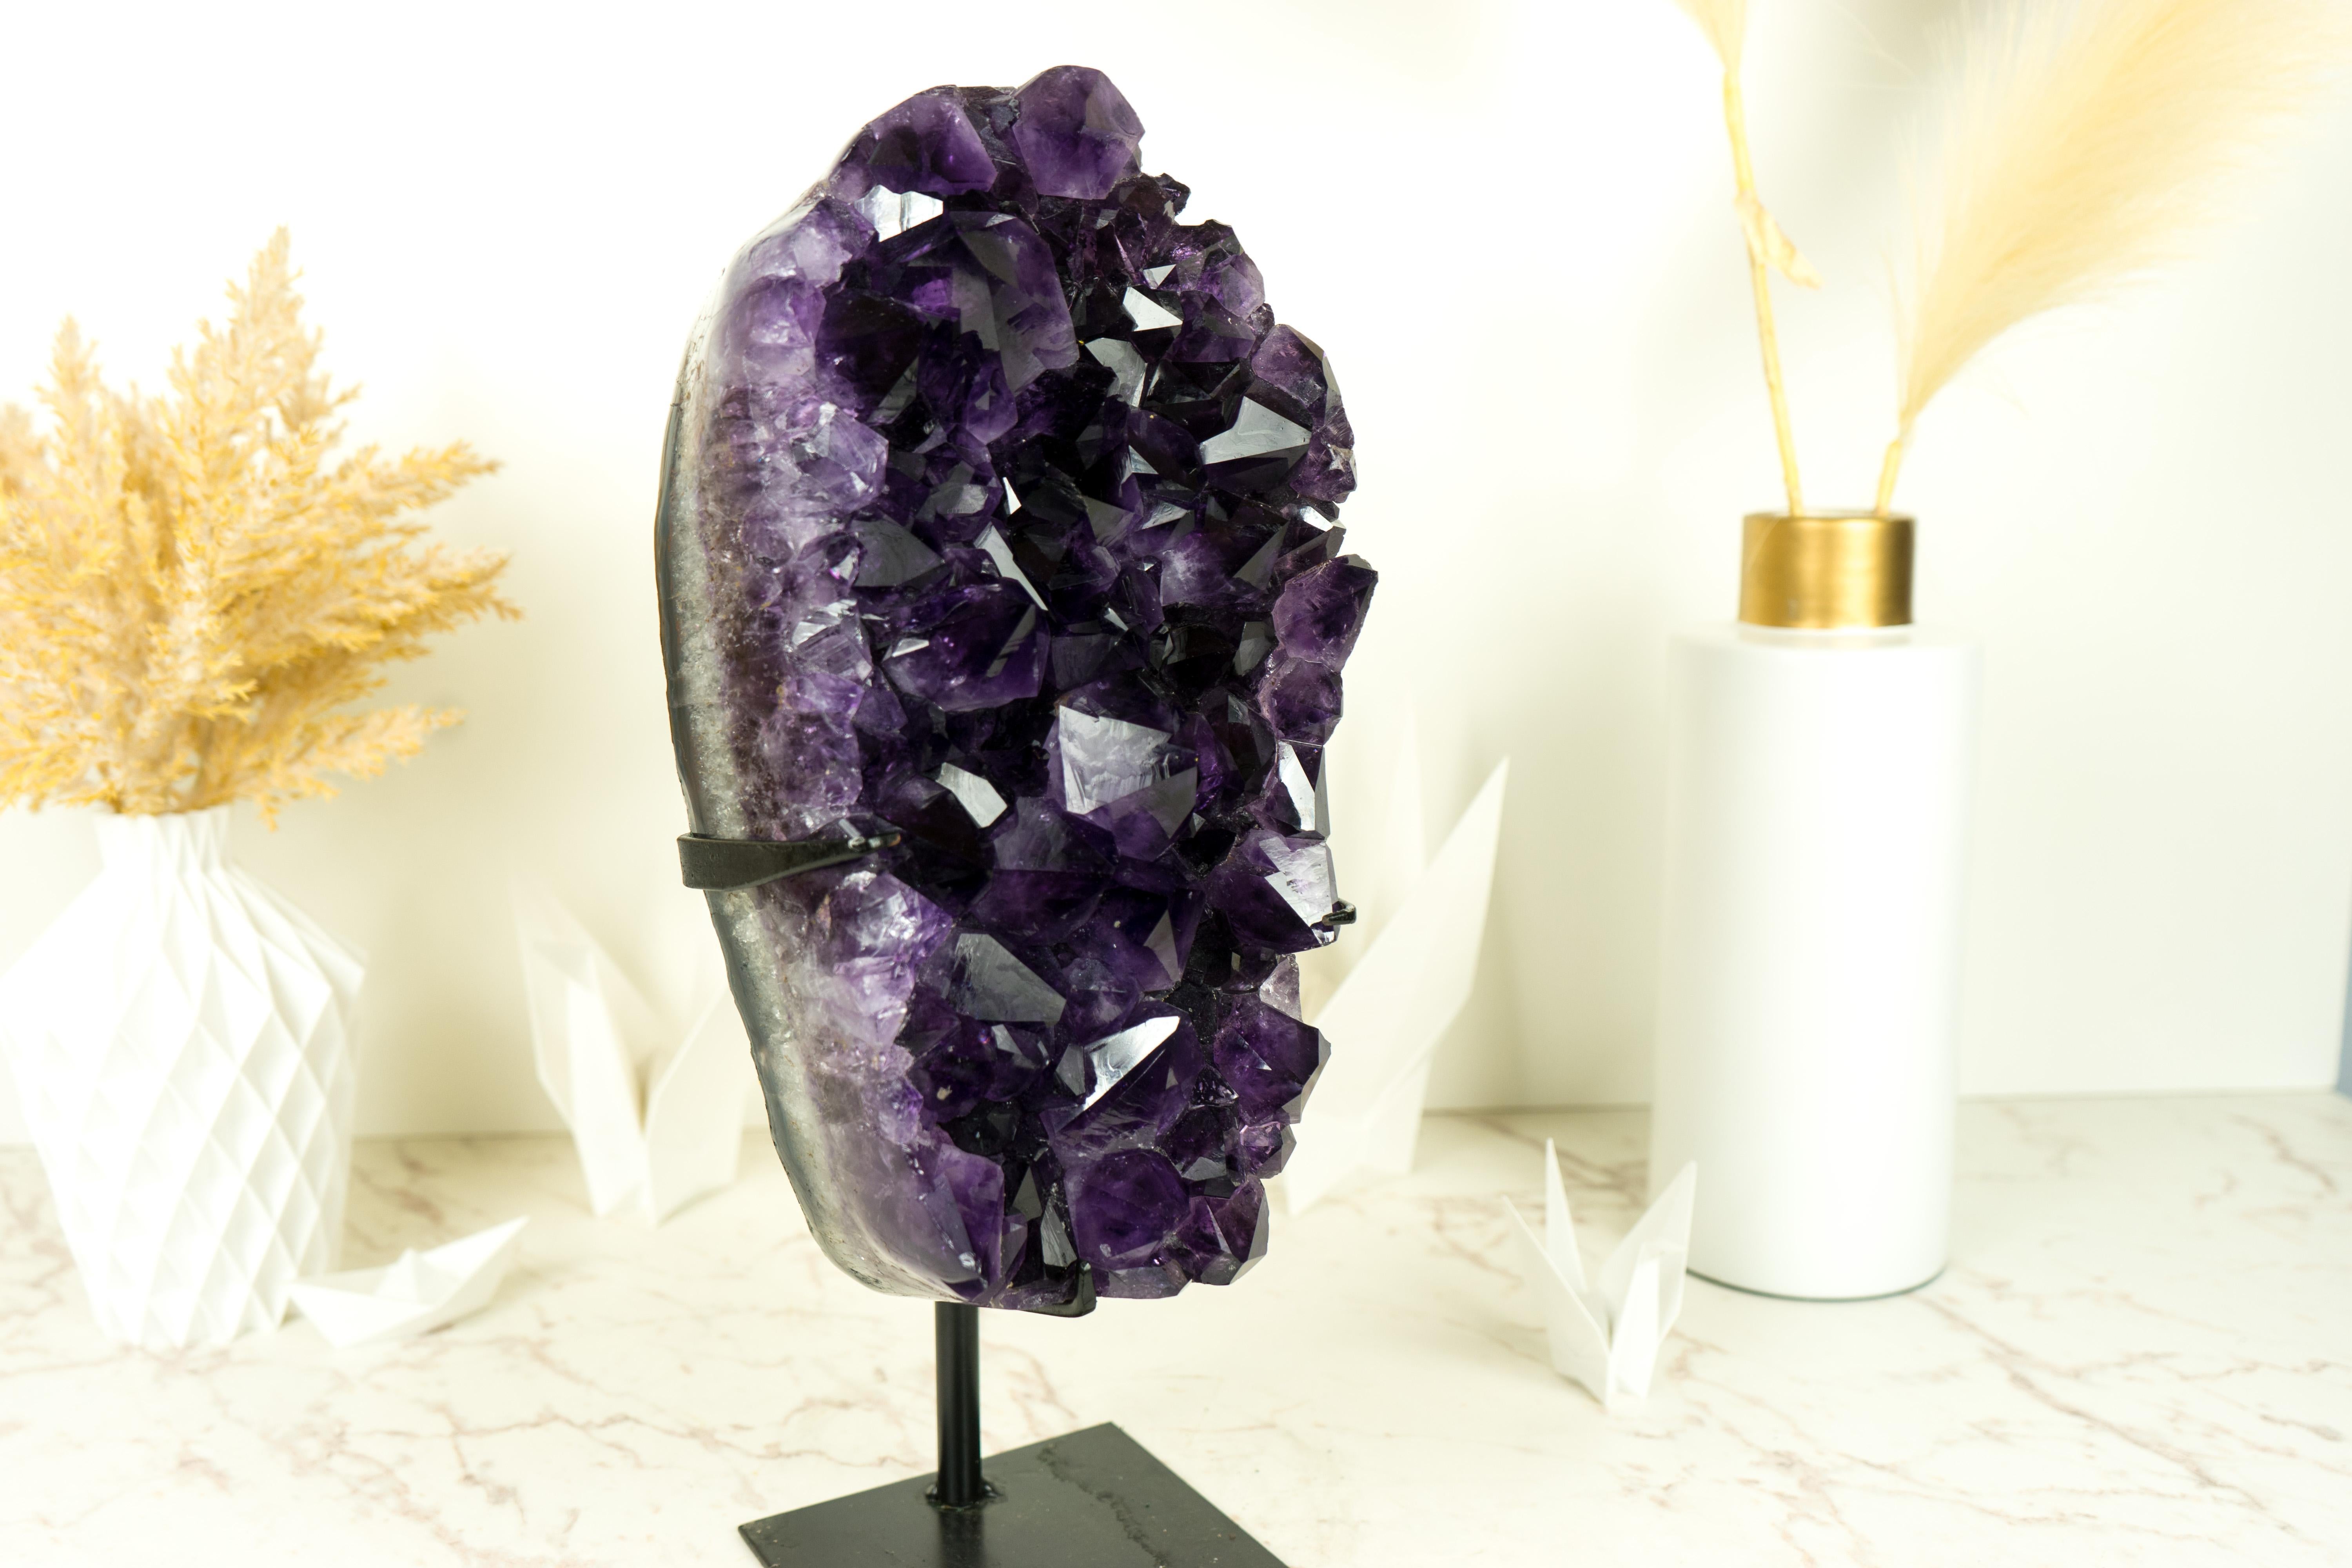 A phenomenal AAA Amethyst Geode Cluster that surely will leave you in awe, this natural Amethyst brings large size and world-class characteristics that will make it a phenomenal addition to any crystal collection or decor.

The deep purple color